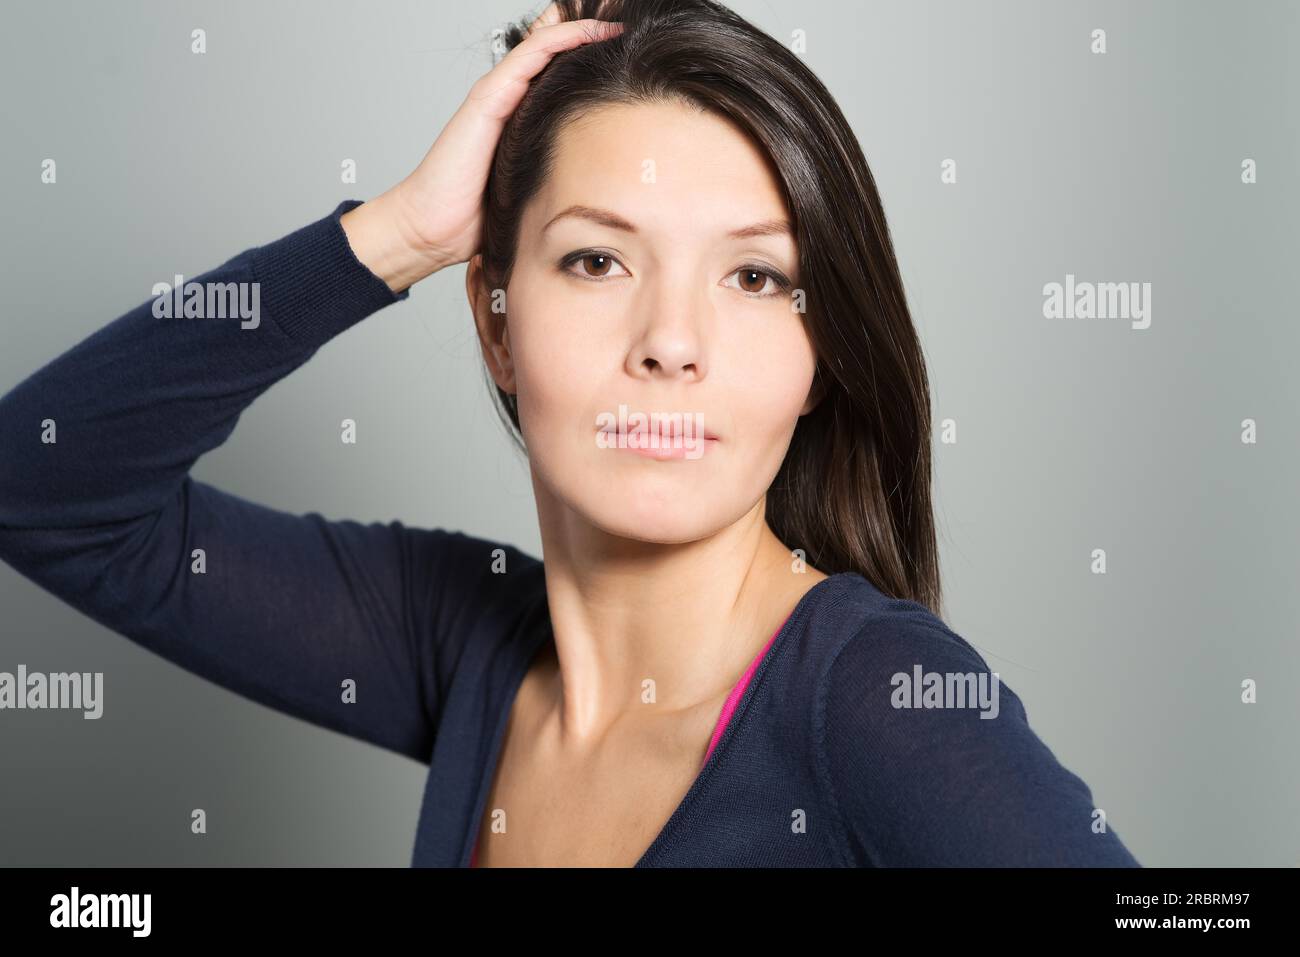 Thoughtful attractive woman with a serene face and enigmatic smile standing with her hand to her chin looking pensively at the camera Stock Photo